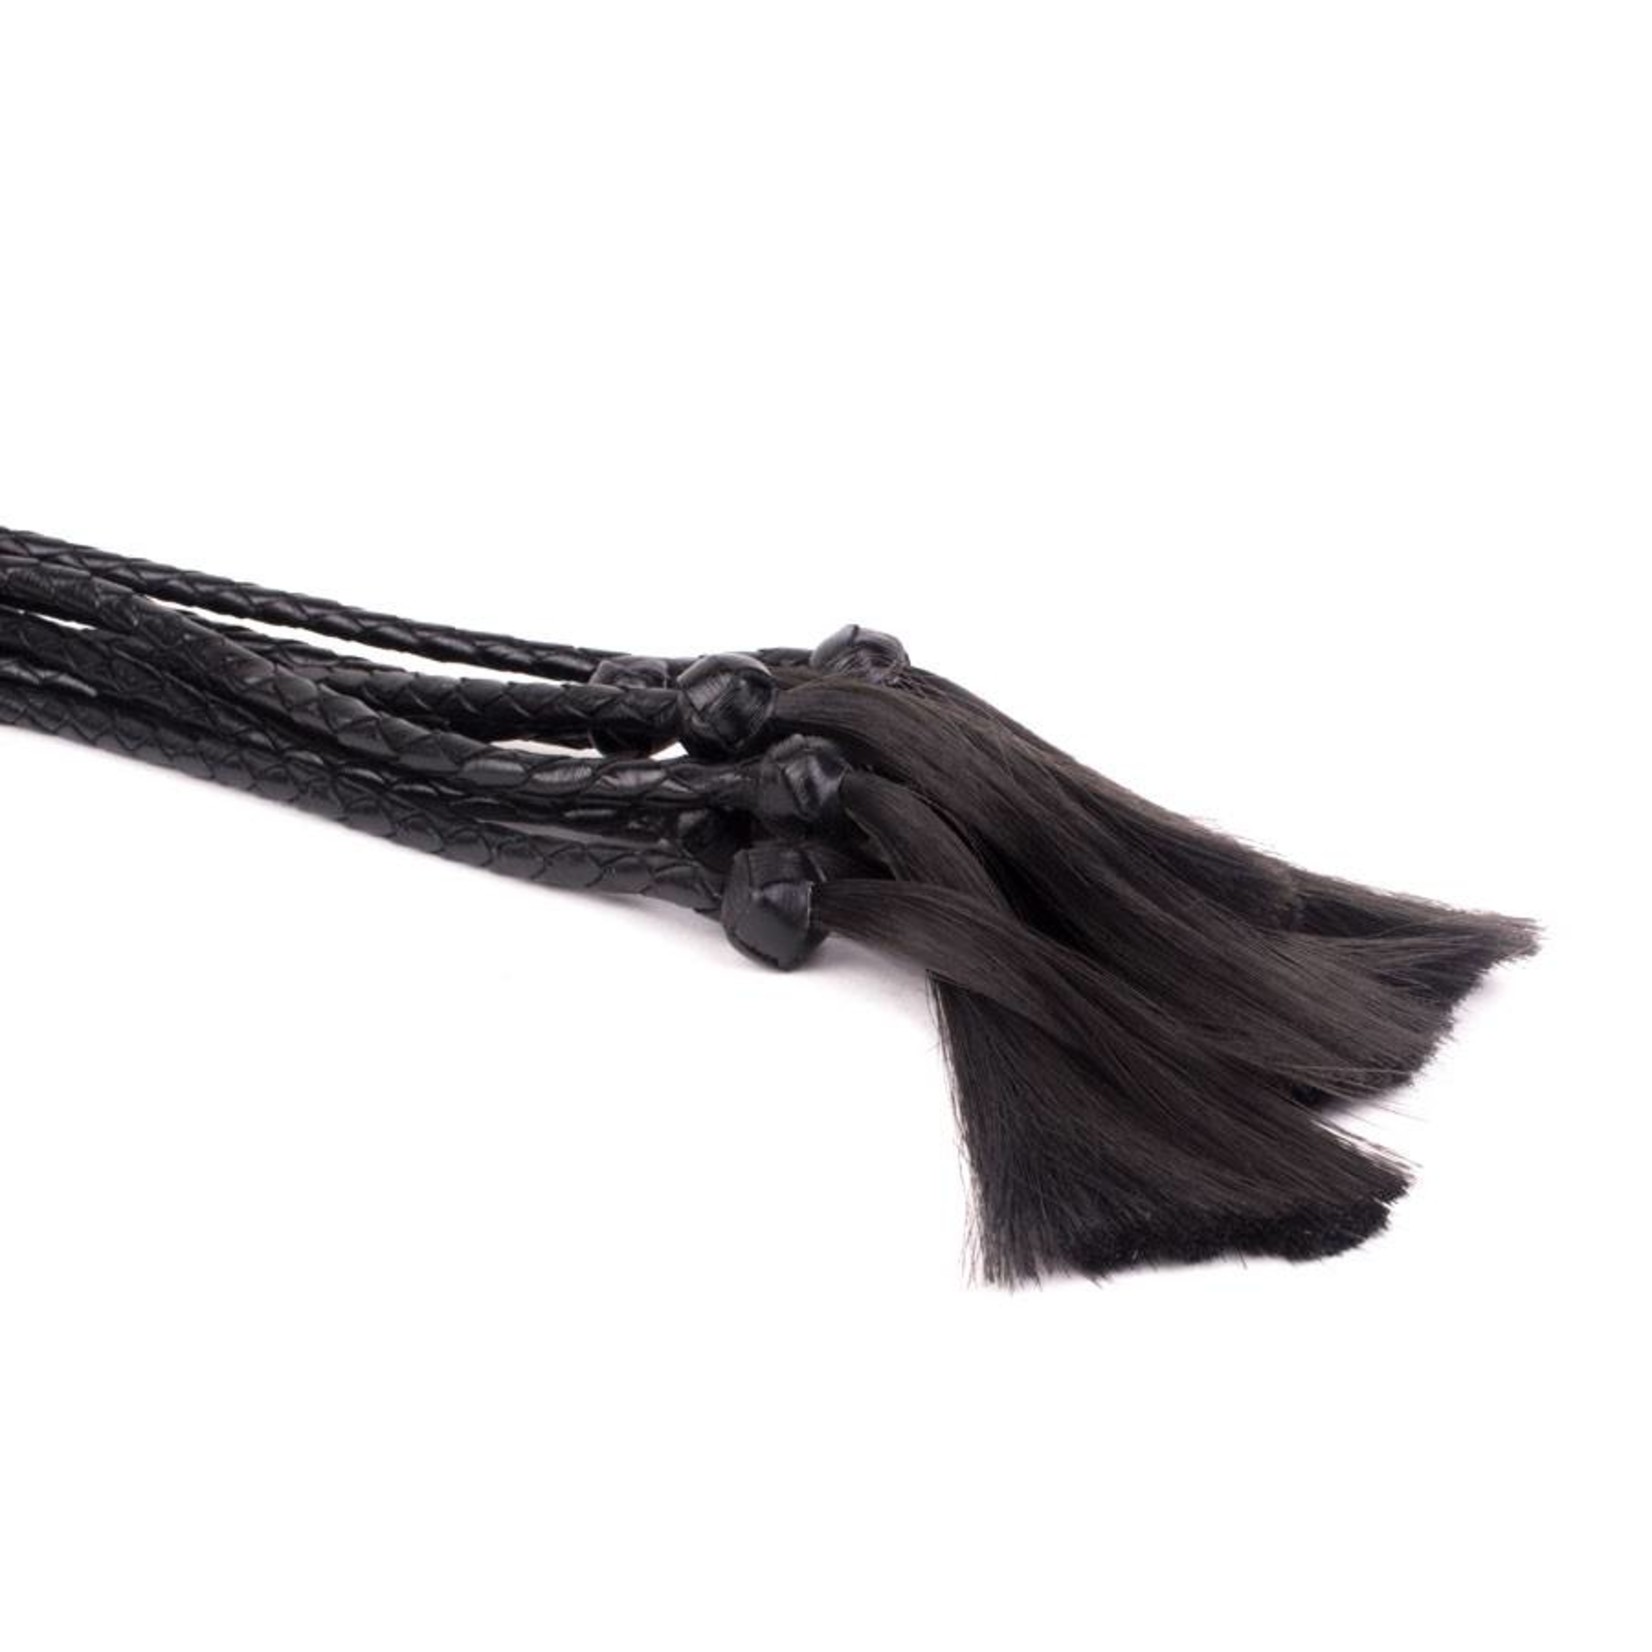 KIOTOS Leather Braided with Hairs - Black Leather